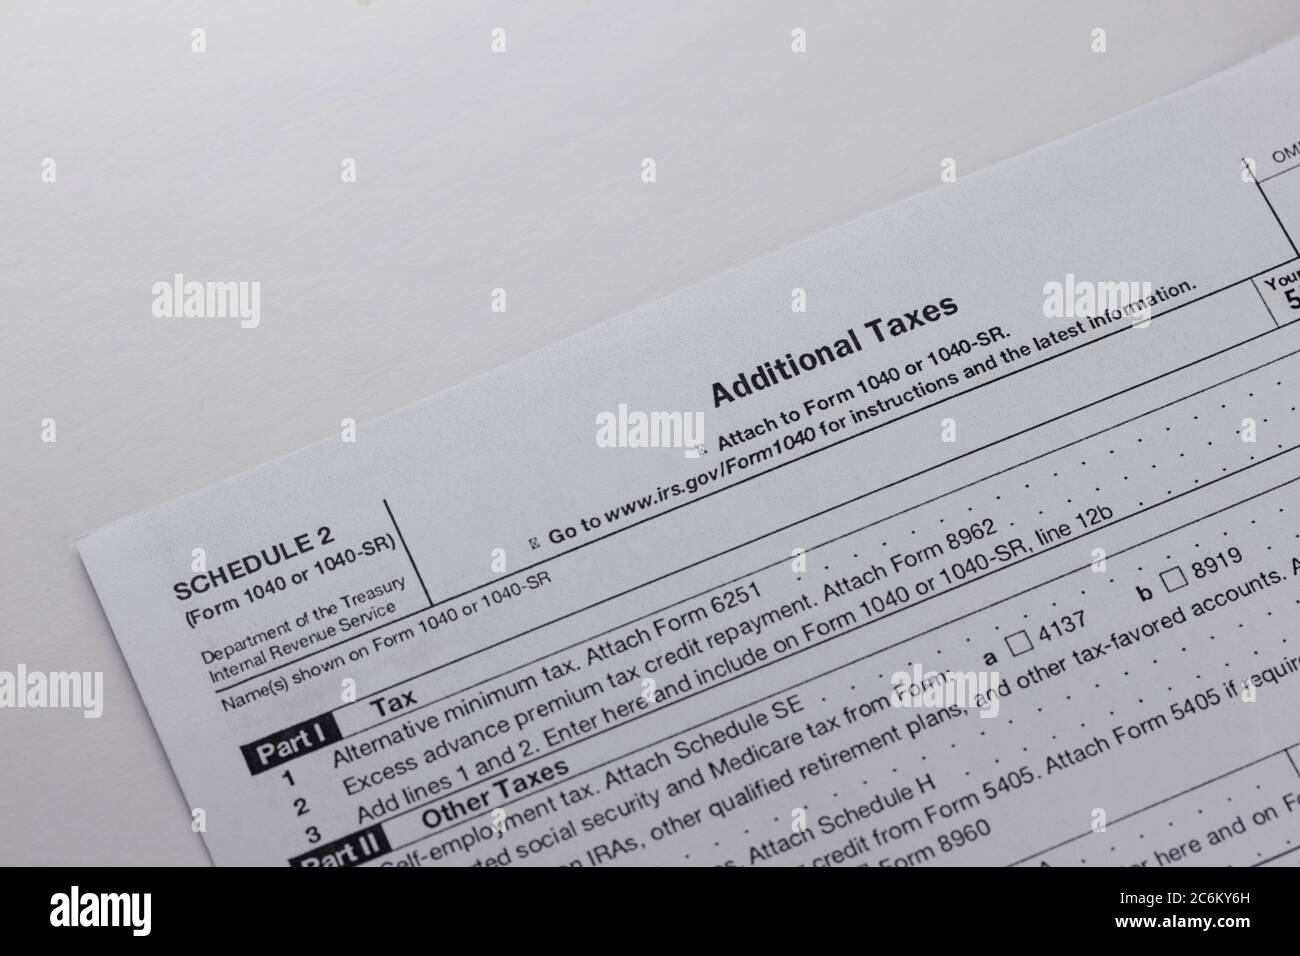 blank irs federal tax form schedule 2 for reporting additional taxes on a white background Stock Photo